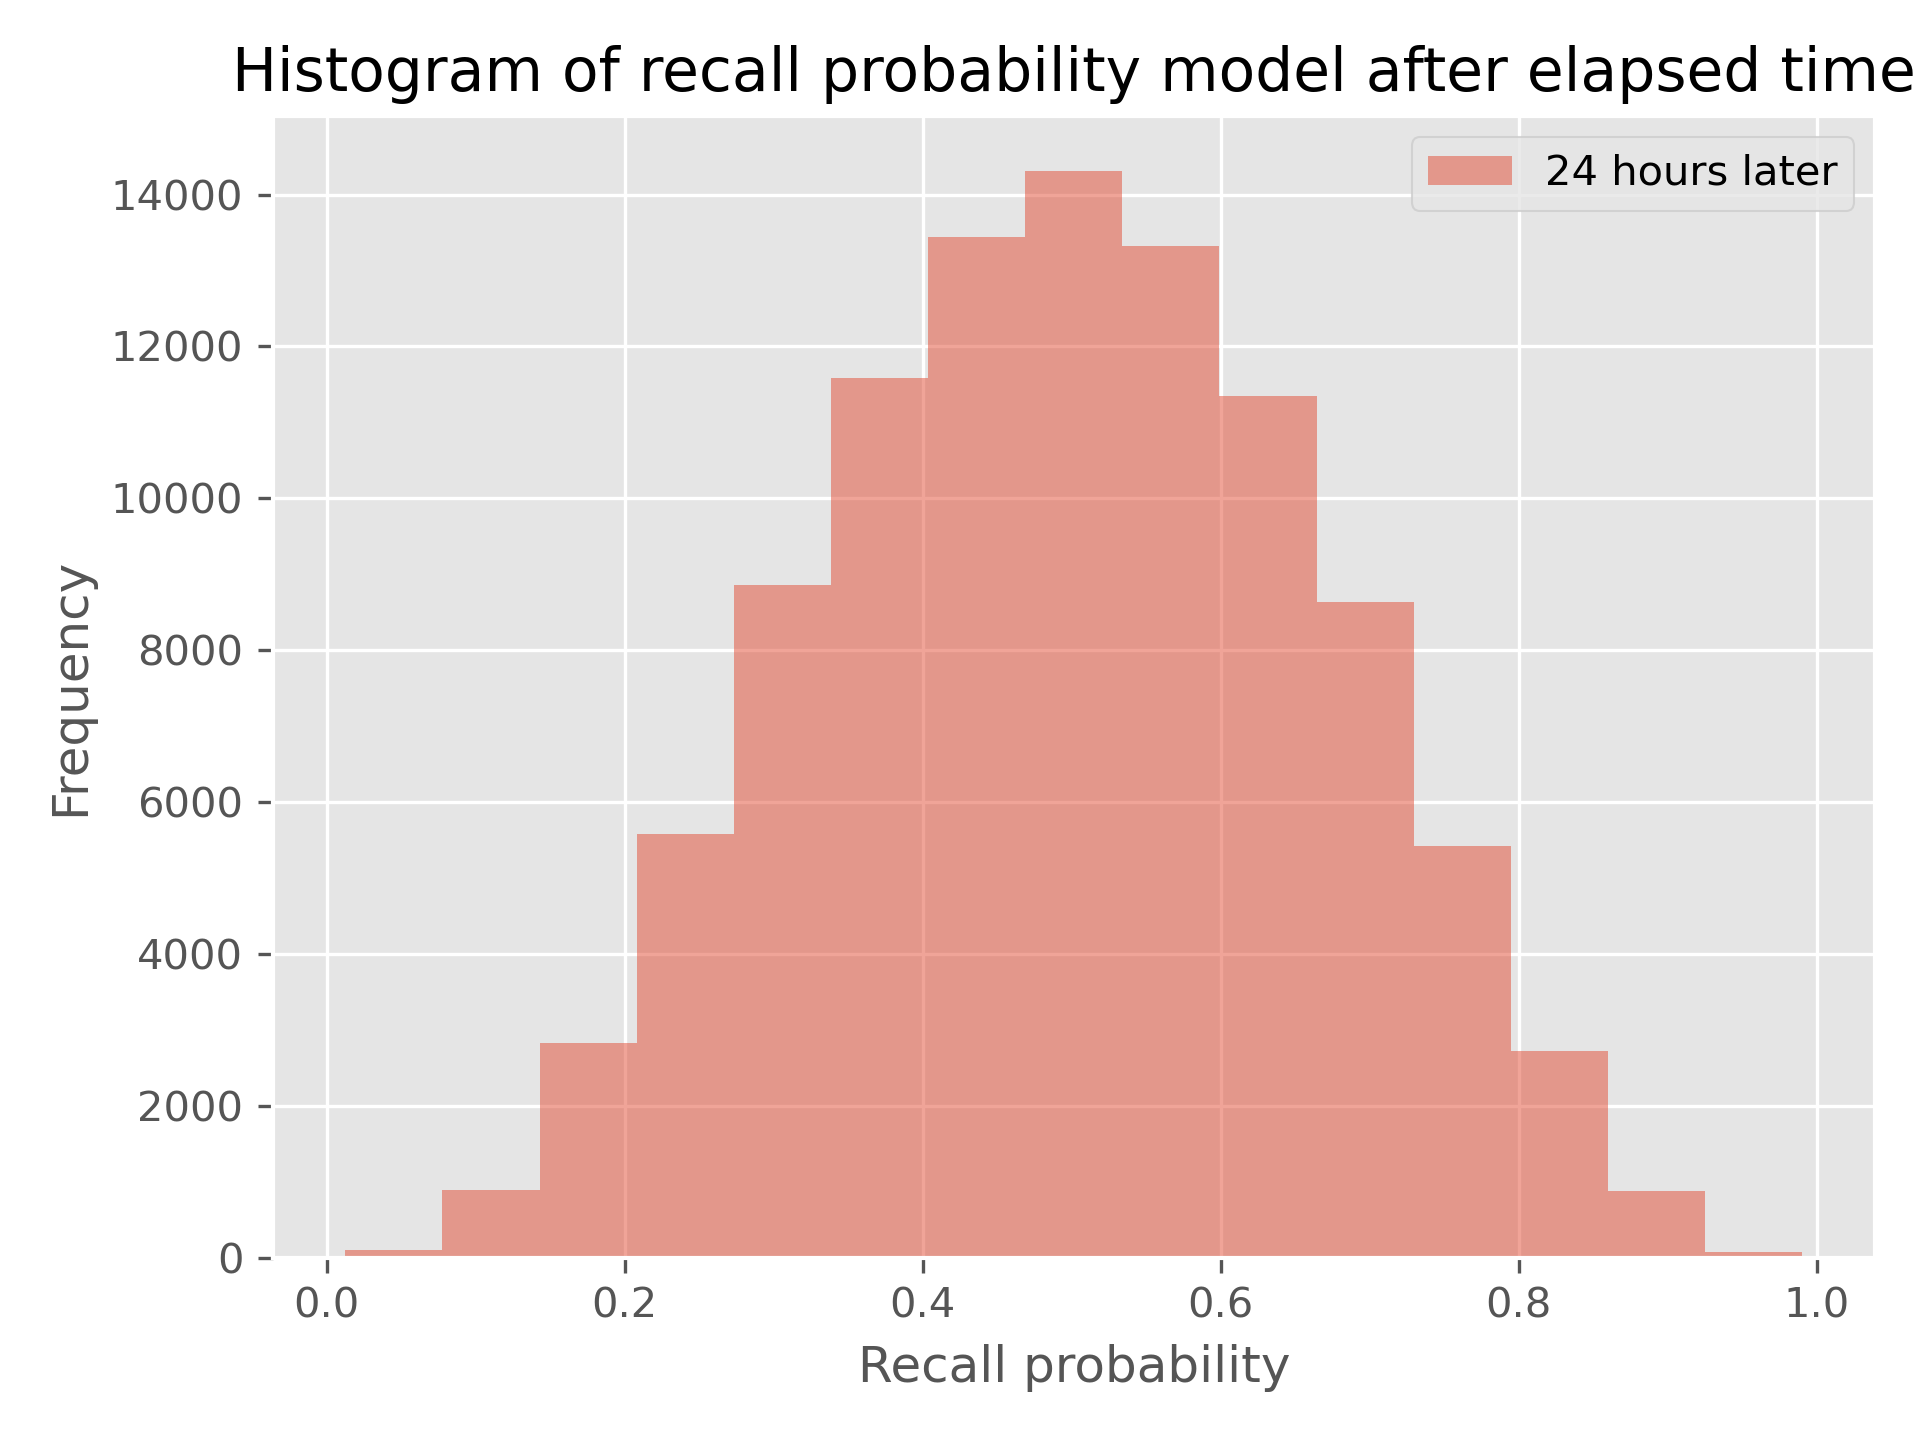 Histogram with x axis running from 0 to 1 (recall probability) and y axis from 0 to several thousand (frequency), showing a symmetric plot with a peak at 0.5 and decaying to the edges